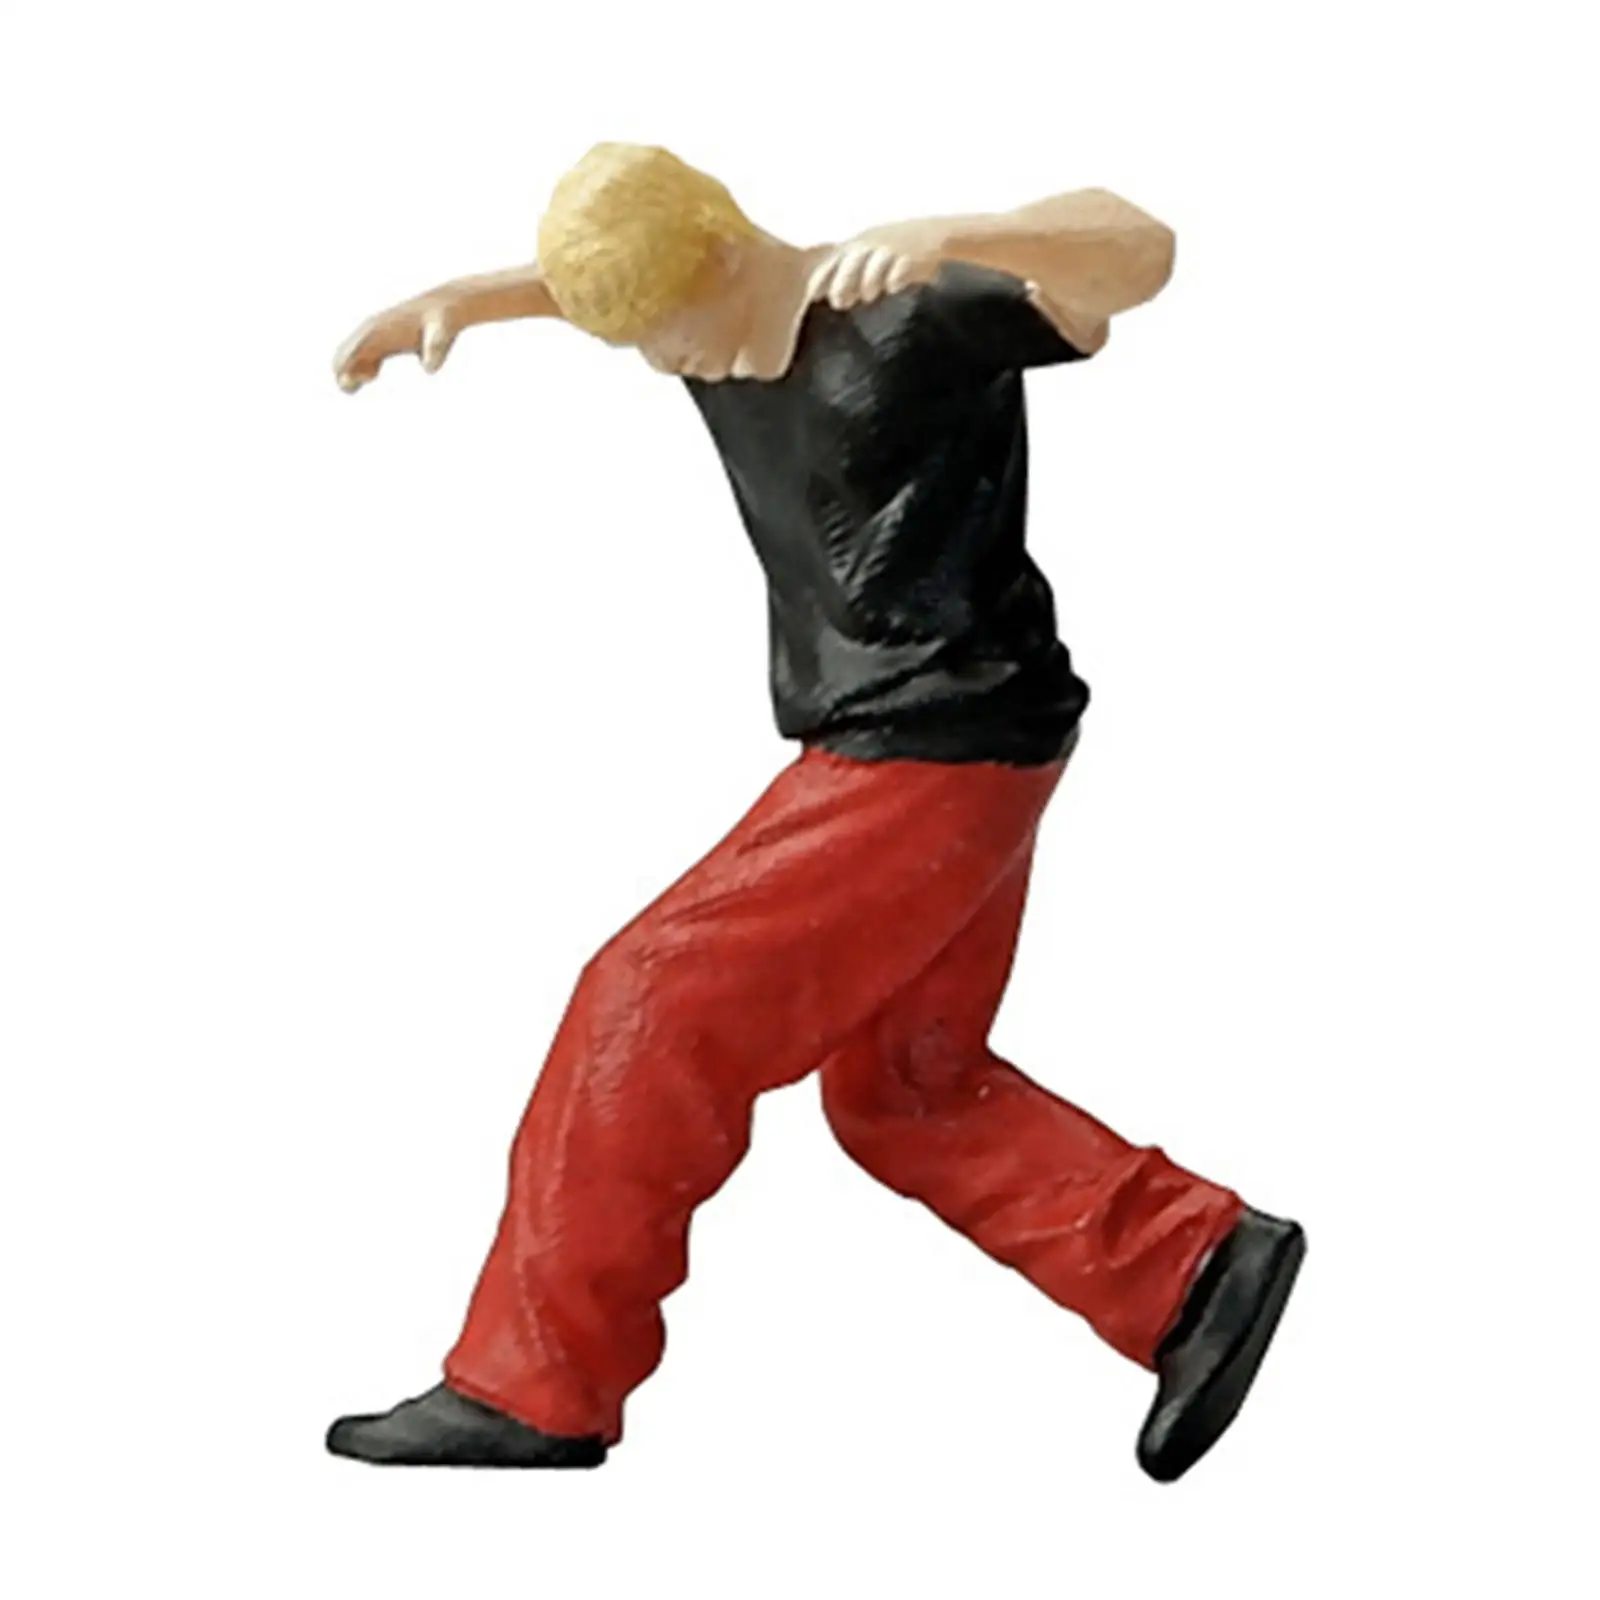 1/64 Scale Figure Street Dancer Movie Character Handpainted for Layout Desktop Ornament Fairy Garden Diorama Scenery S Scale